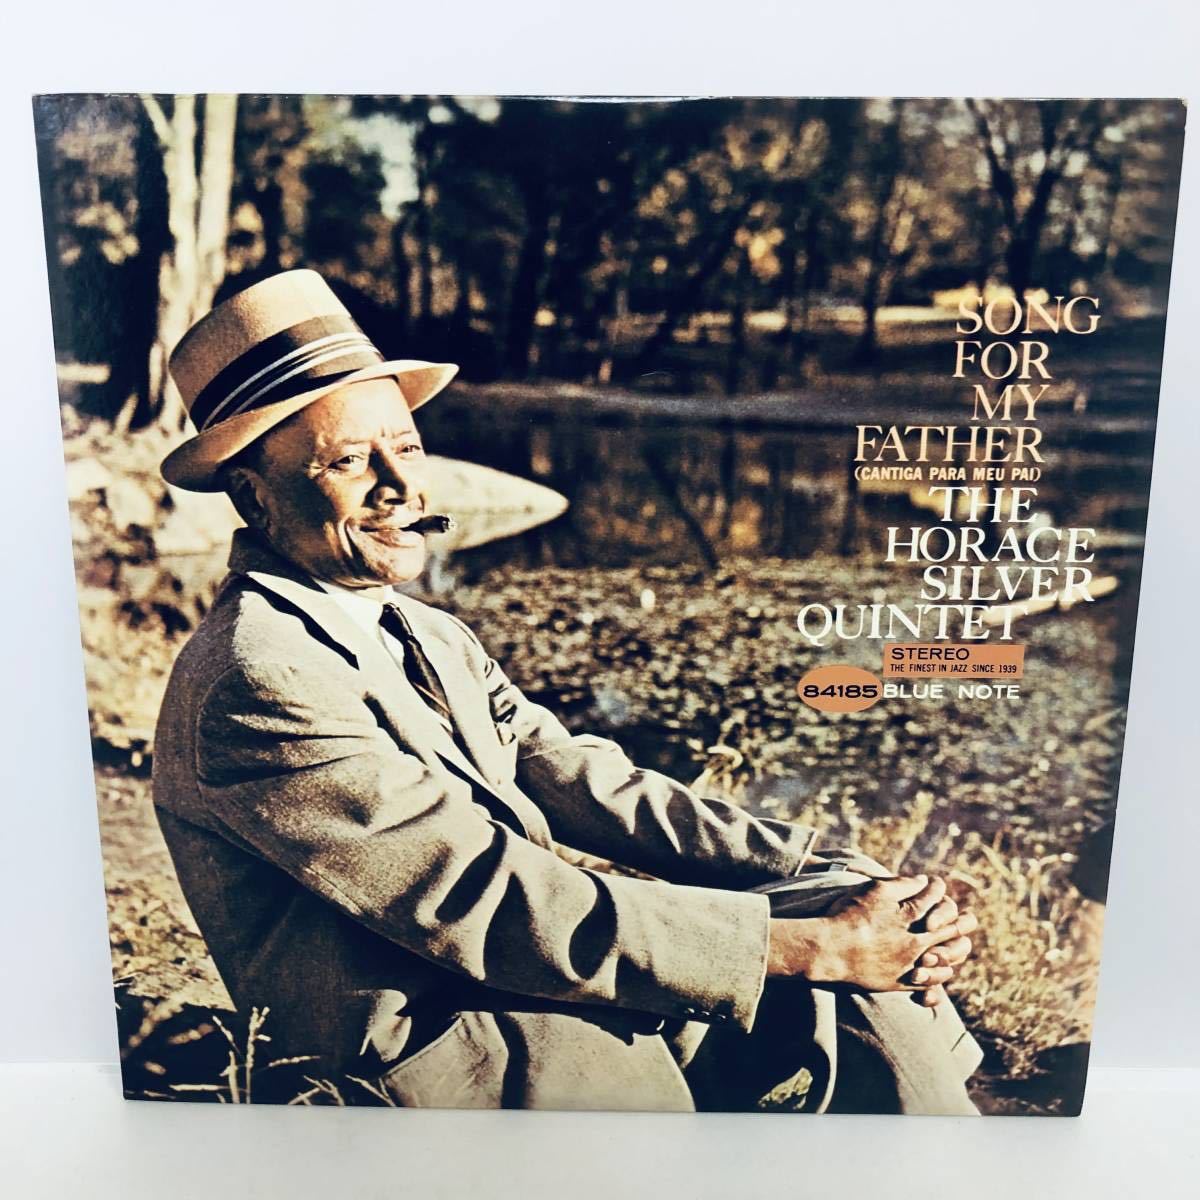 【LP】レコード 再生未確認 The Horace Silver Quintet/Song For My Father/Cantiga Para Meu Pai BST 84185 ※まとめ買い大歓迎!同梱可能の画像1